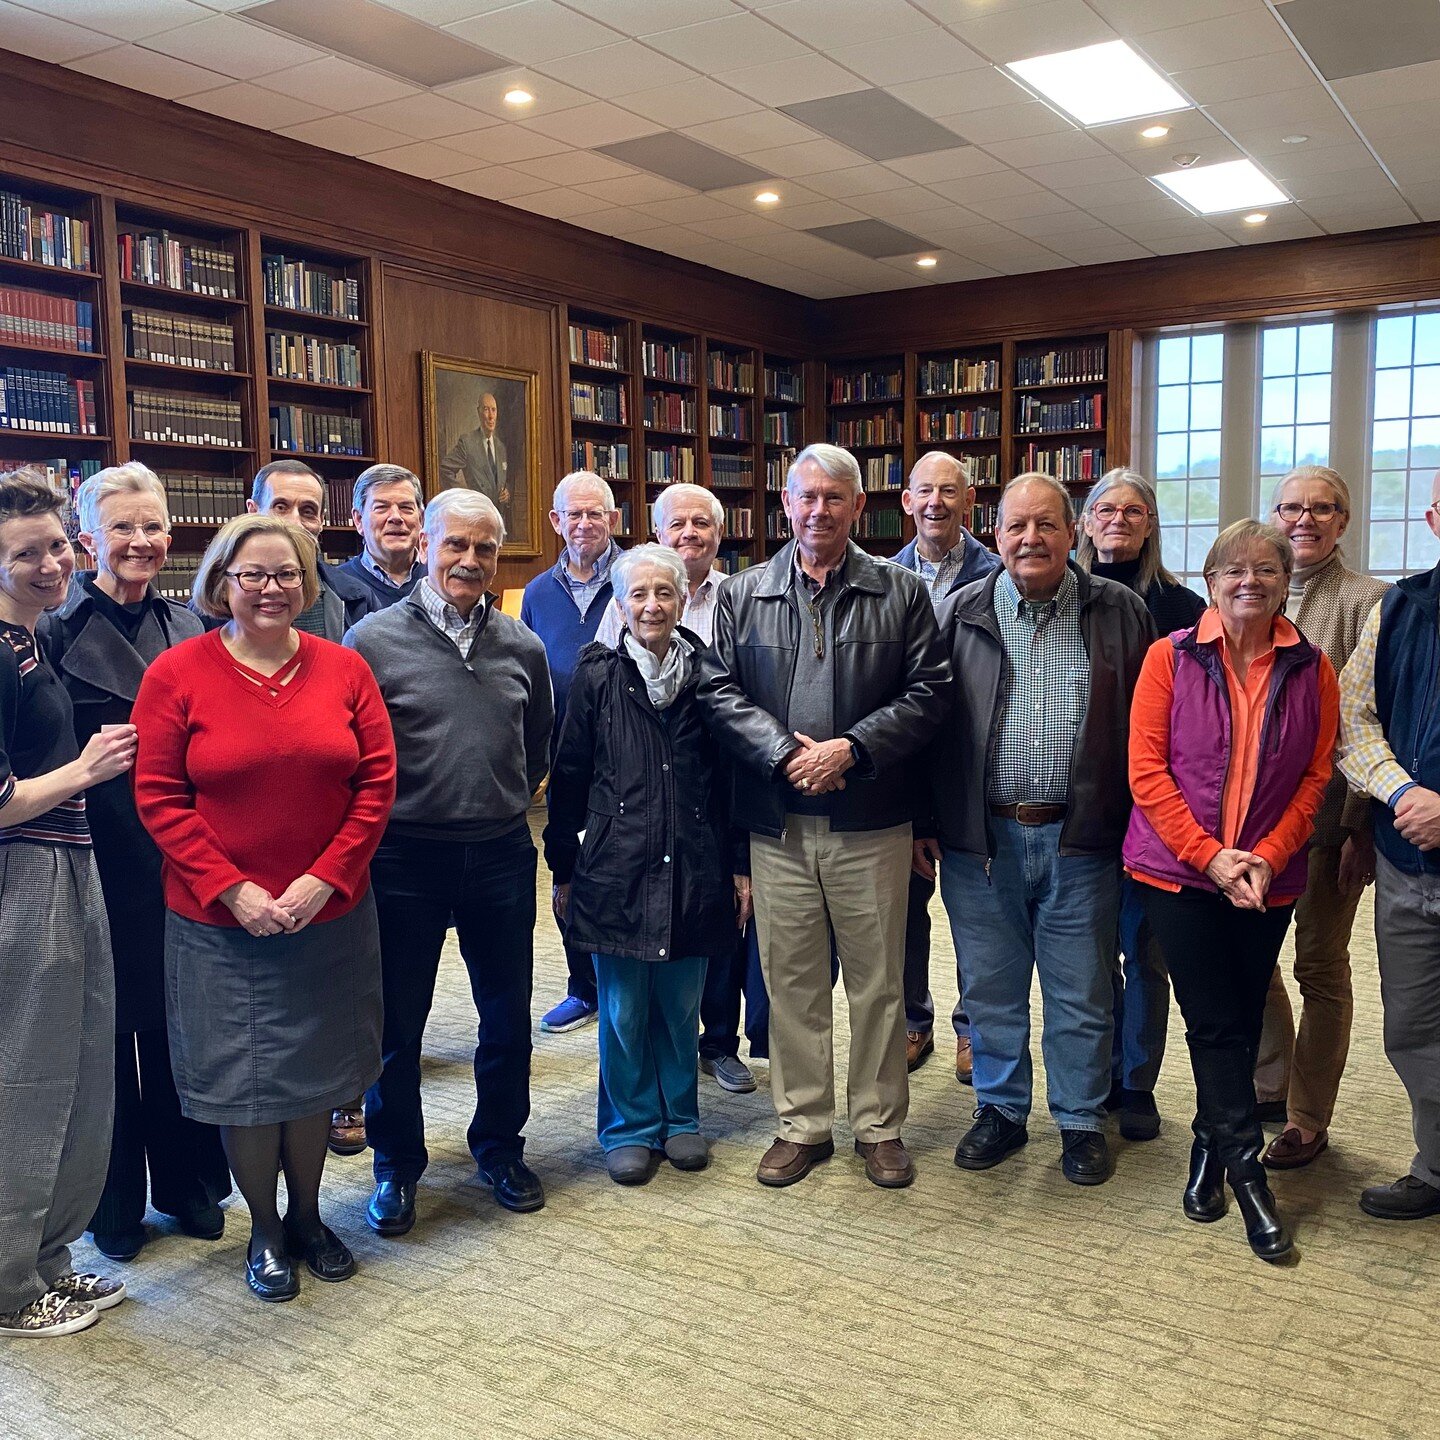 Field trip! Last week, Dodona Manor&rsquo;s Docent and Volunteer team departed bright and early for a special destination: the George C. Marshall Foundation Library and @virginia_military_institute in Lexington, VA.
&nbsp;
Library Director @melissasl